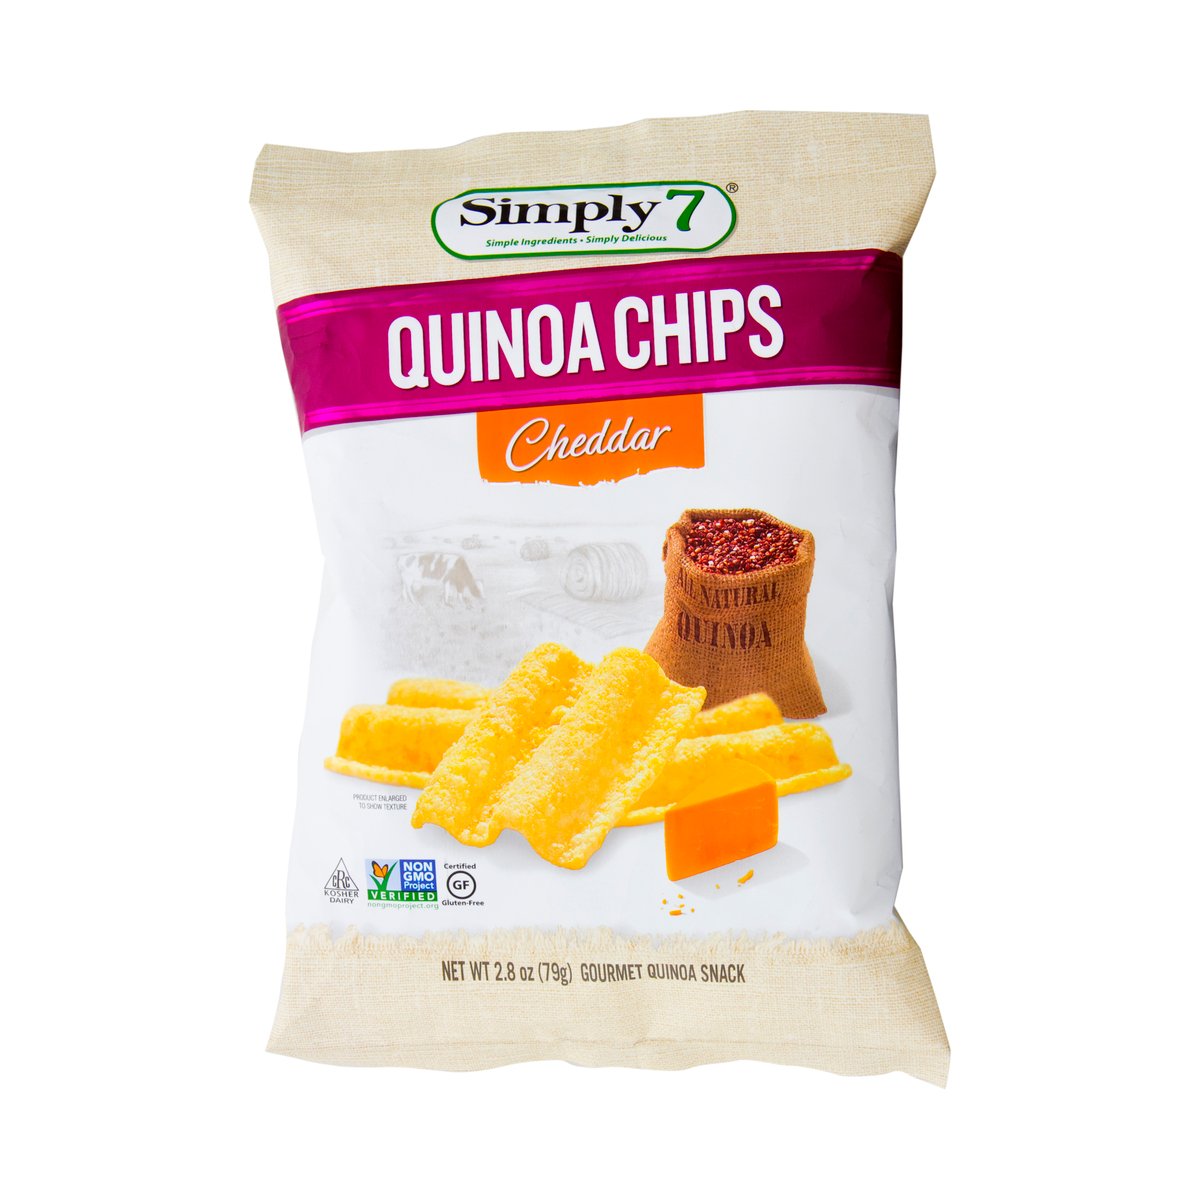 Simply 7 Cheddar Quinoa Chips 79 g